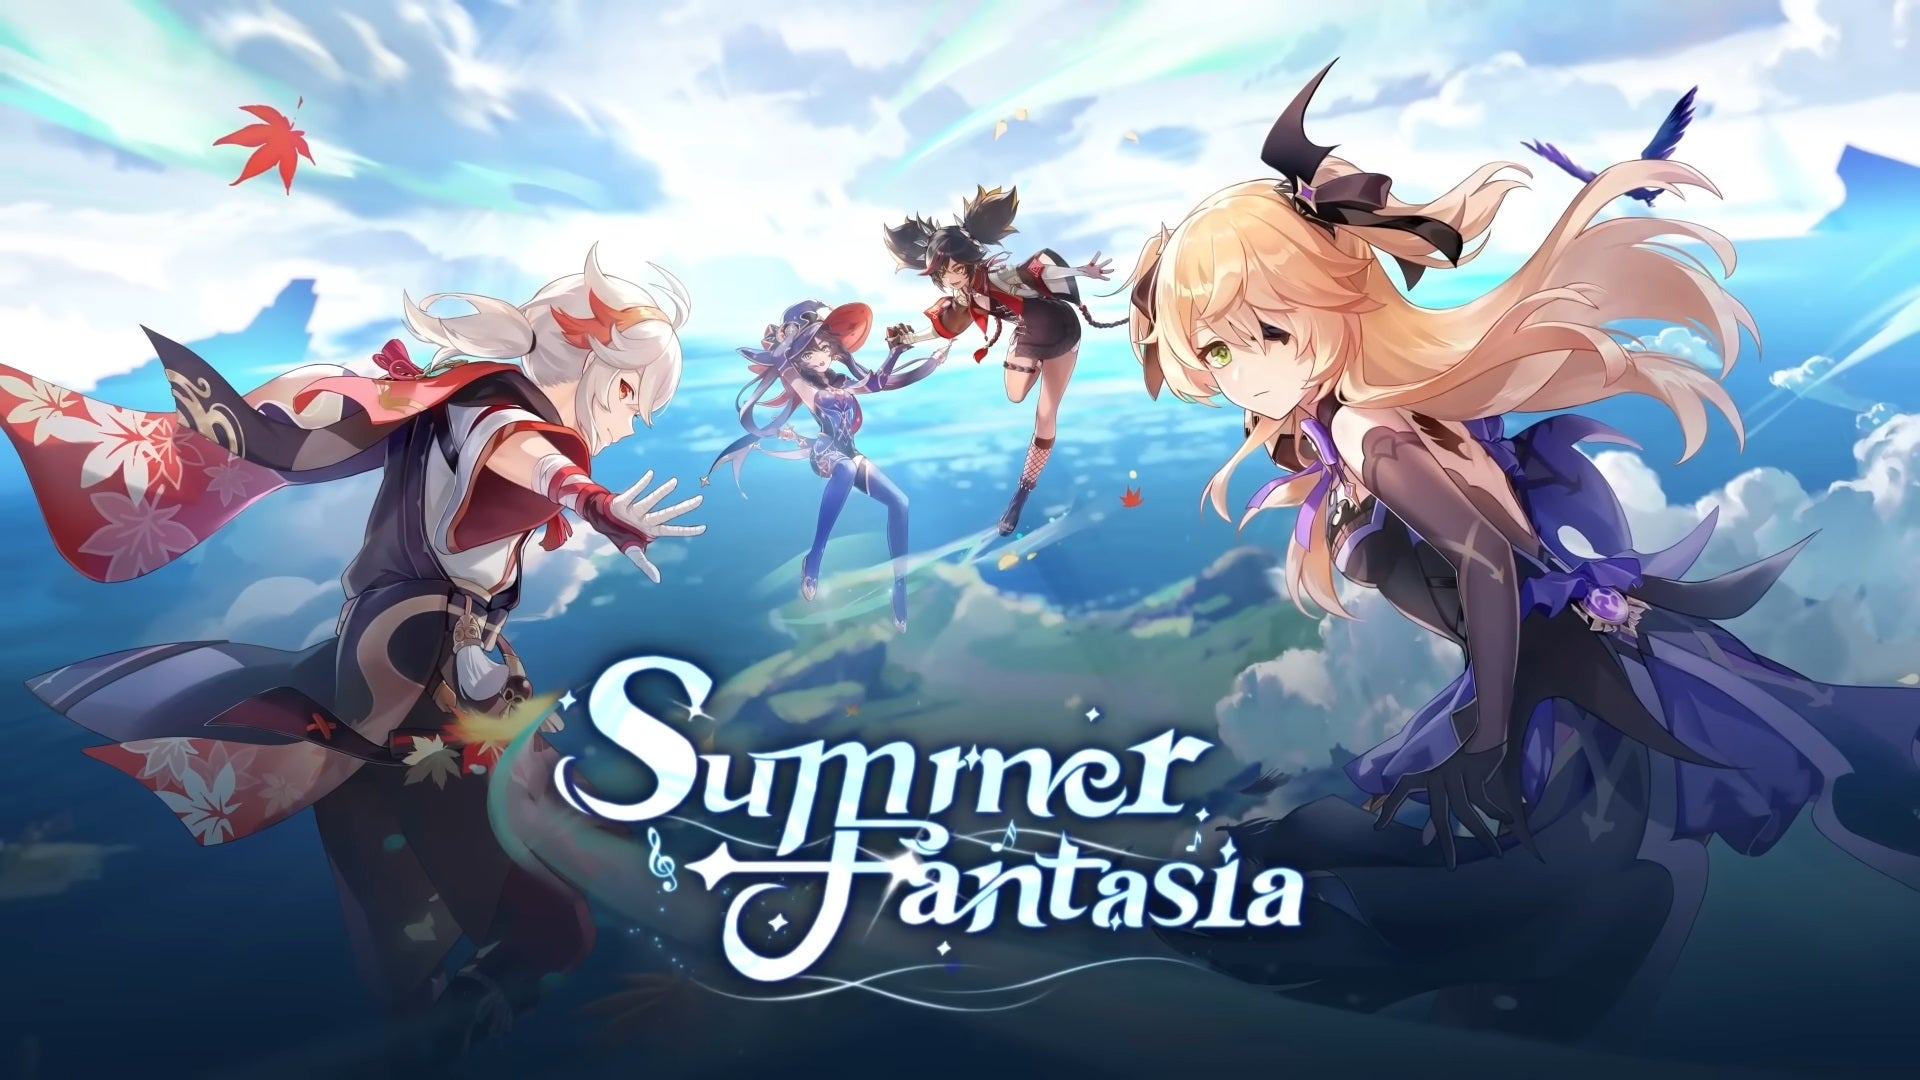 Kazuha, Mona, Xinyan, and Fischl fly towards the Golden Apple Archipelago in Genshin Impact. Text on screen reads "Summer Fantasia", the subtitle given to Version 2.8.